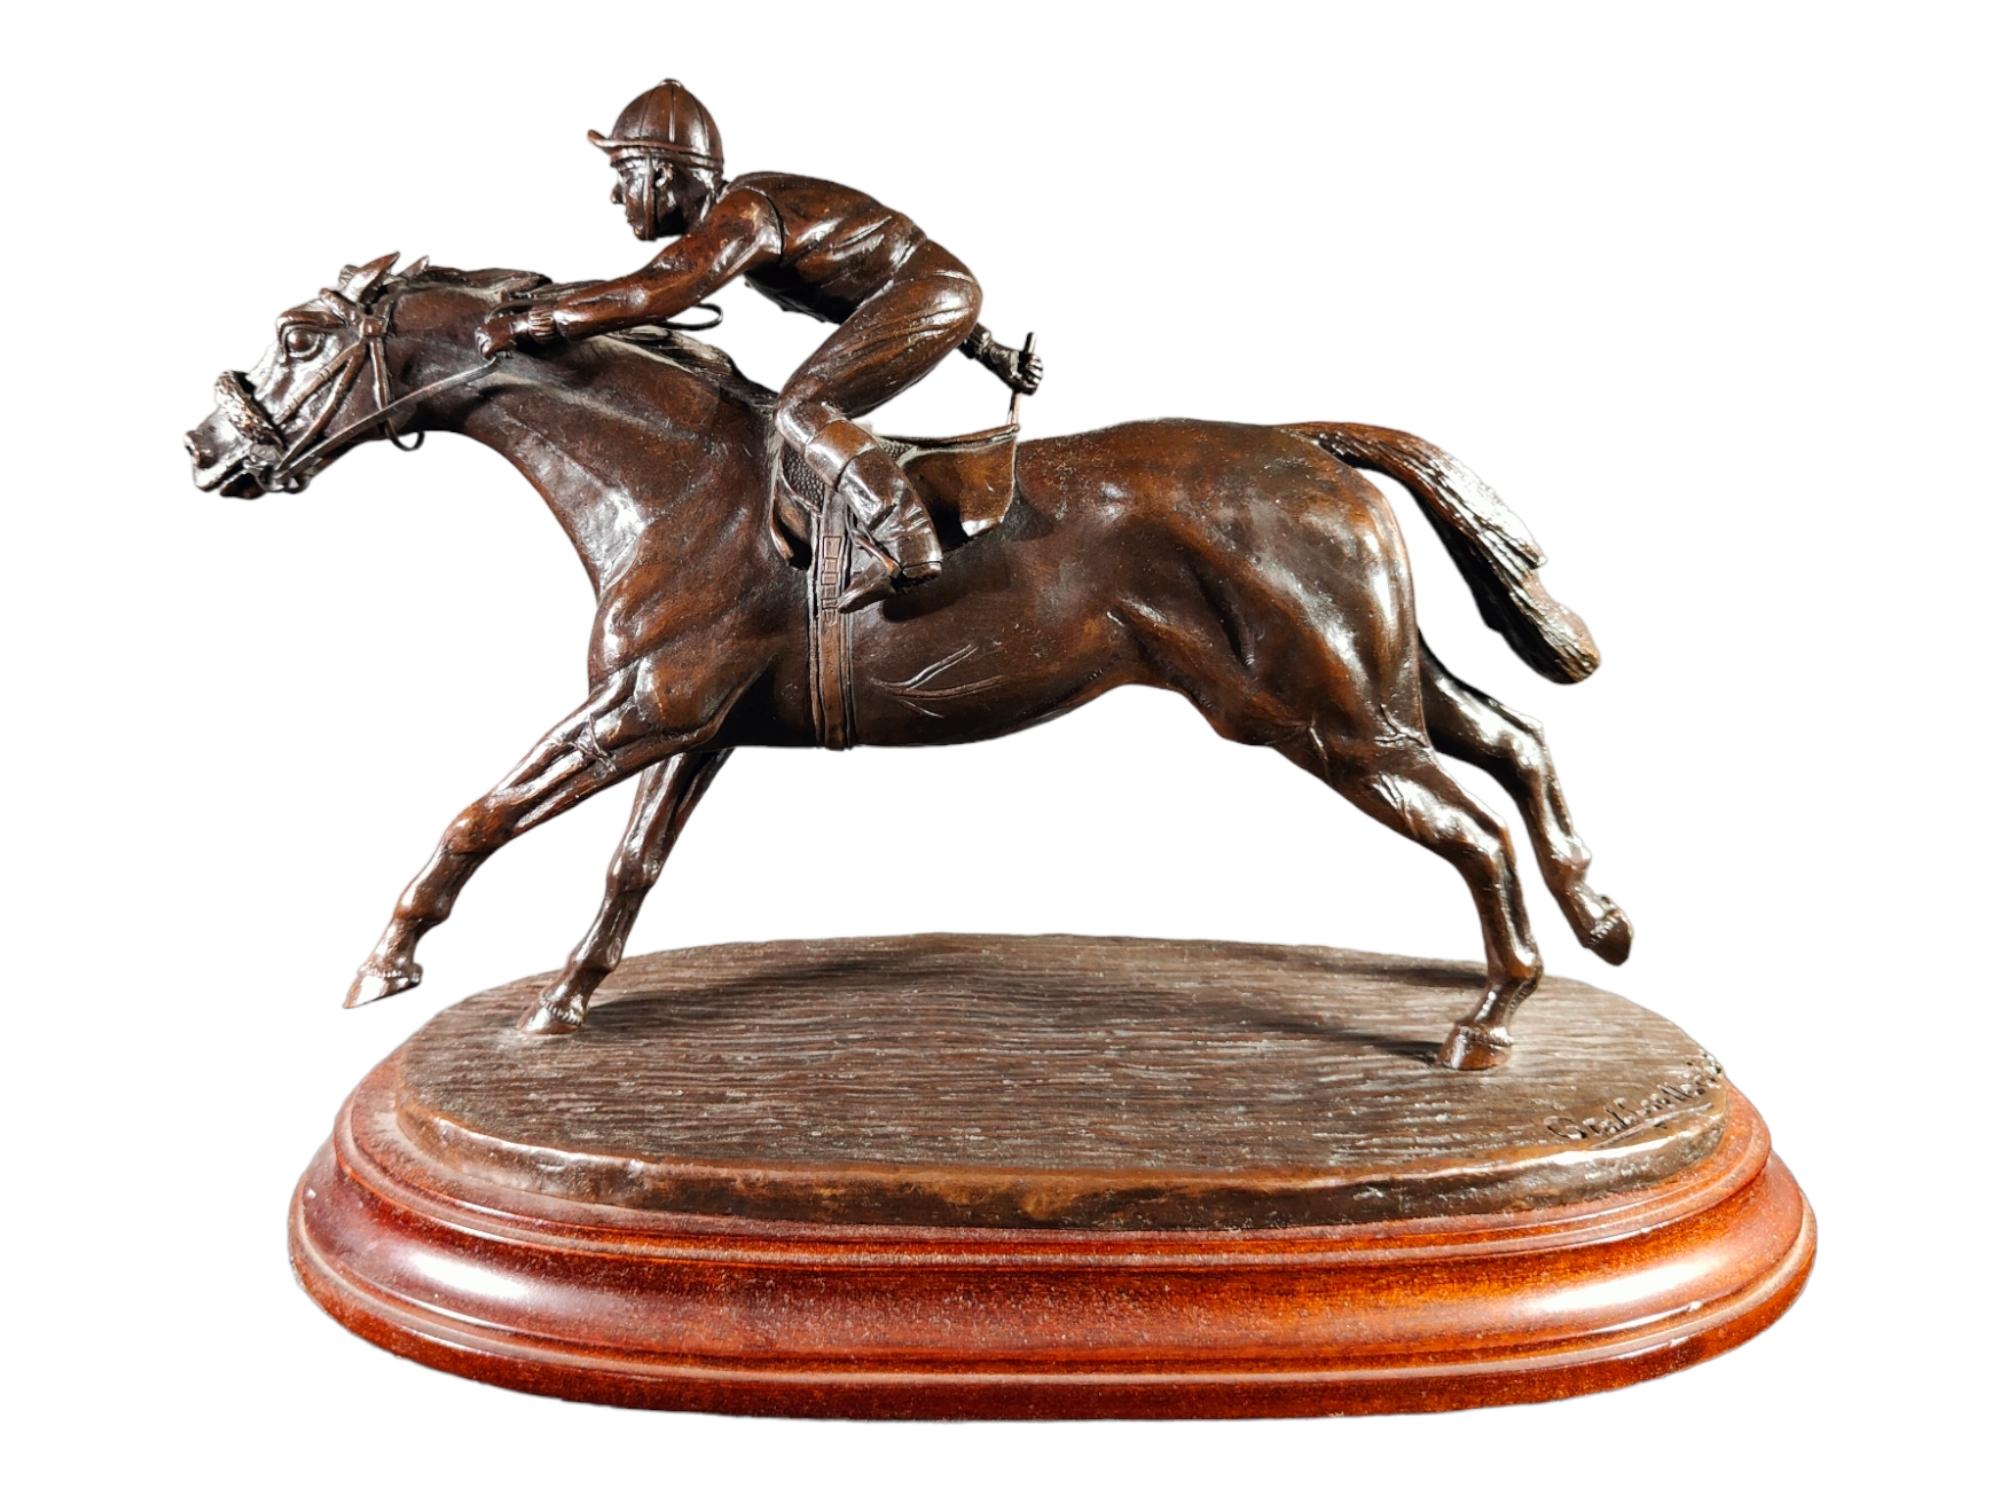 Polo player sculpture By General Coello of Portugal.
Polo player sculpture by General Coello of Portugal polo player sculpture in blued bronze signed in 1983. Measures: 31 x 35 x 12 cm.